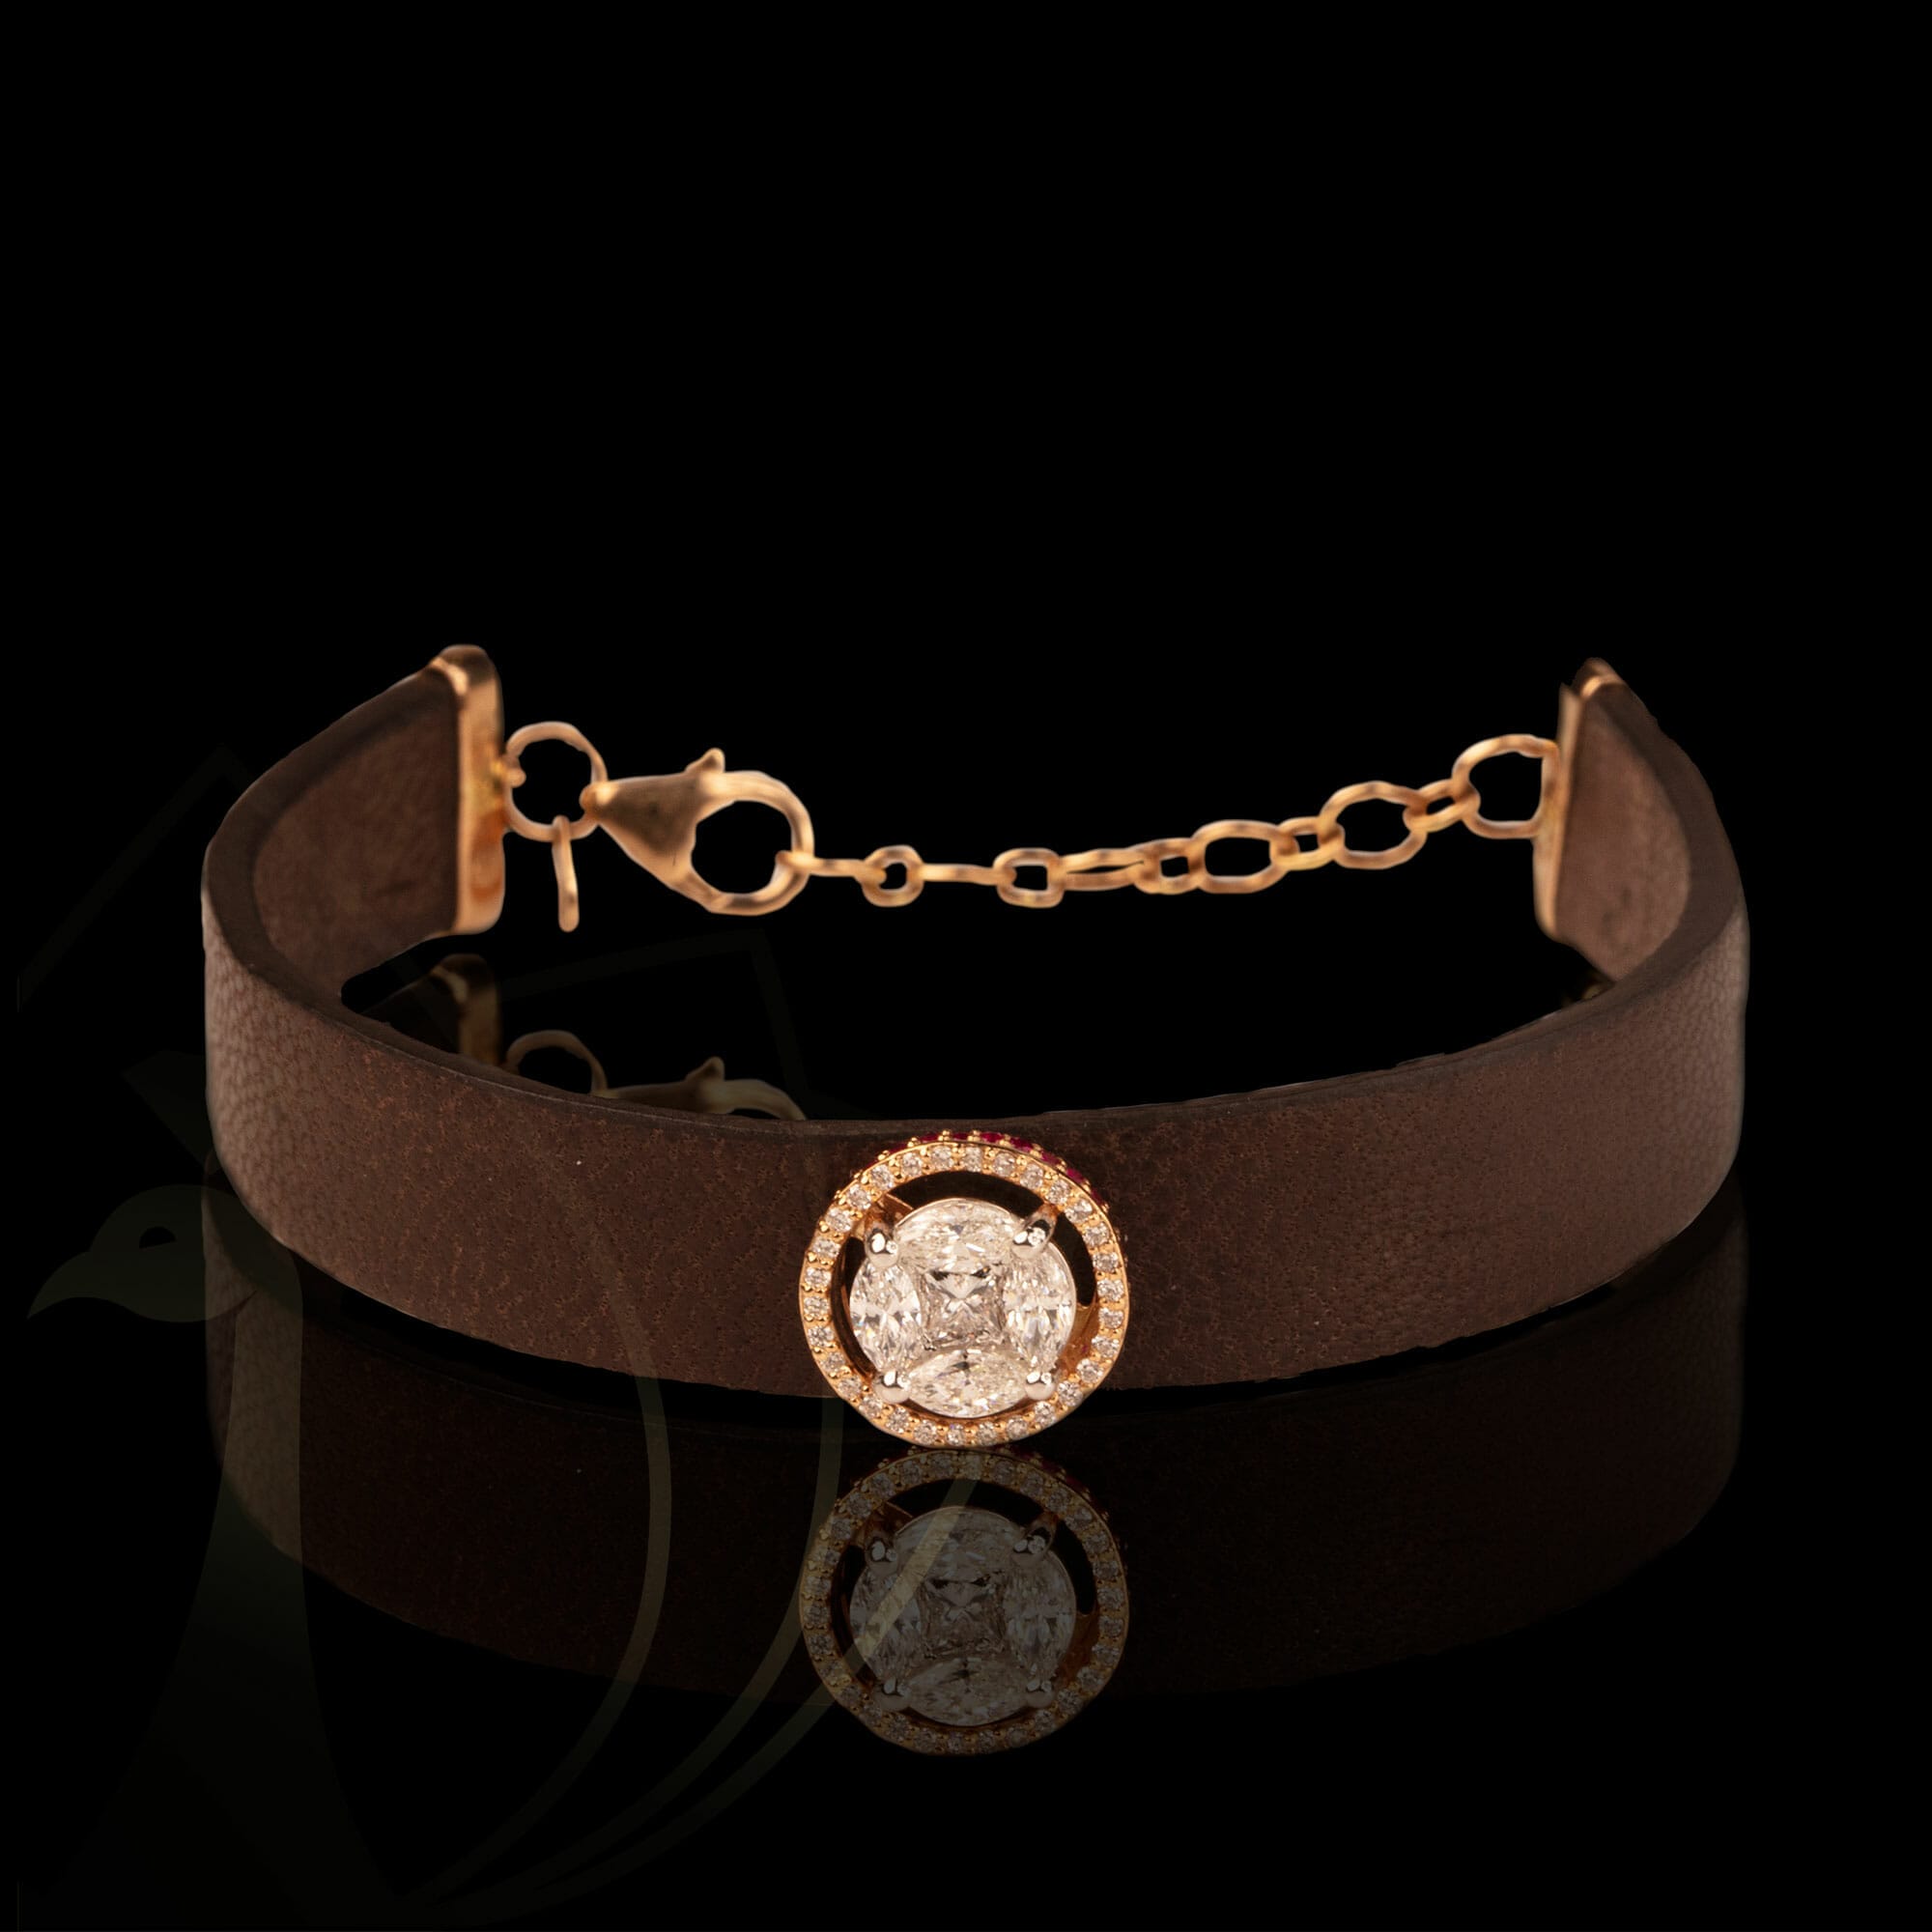 Exquisite Ecstasy Diamond Bracelet in Genuine Leather from our exclusive Gulz Collection